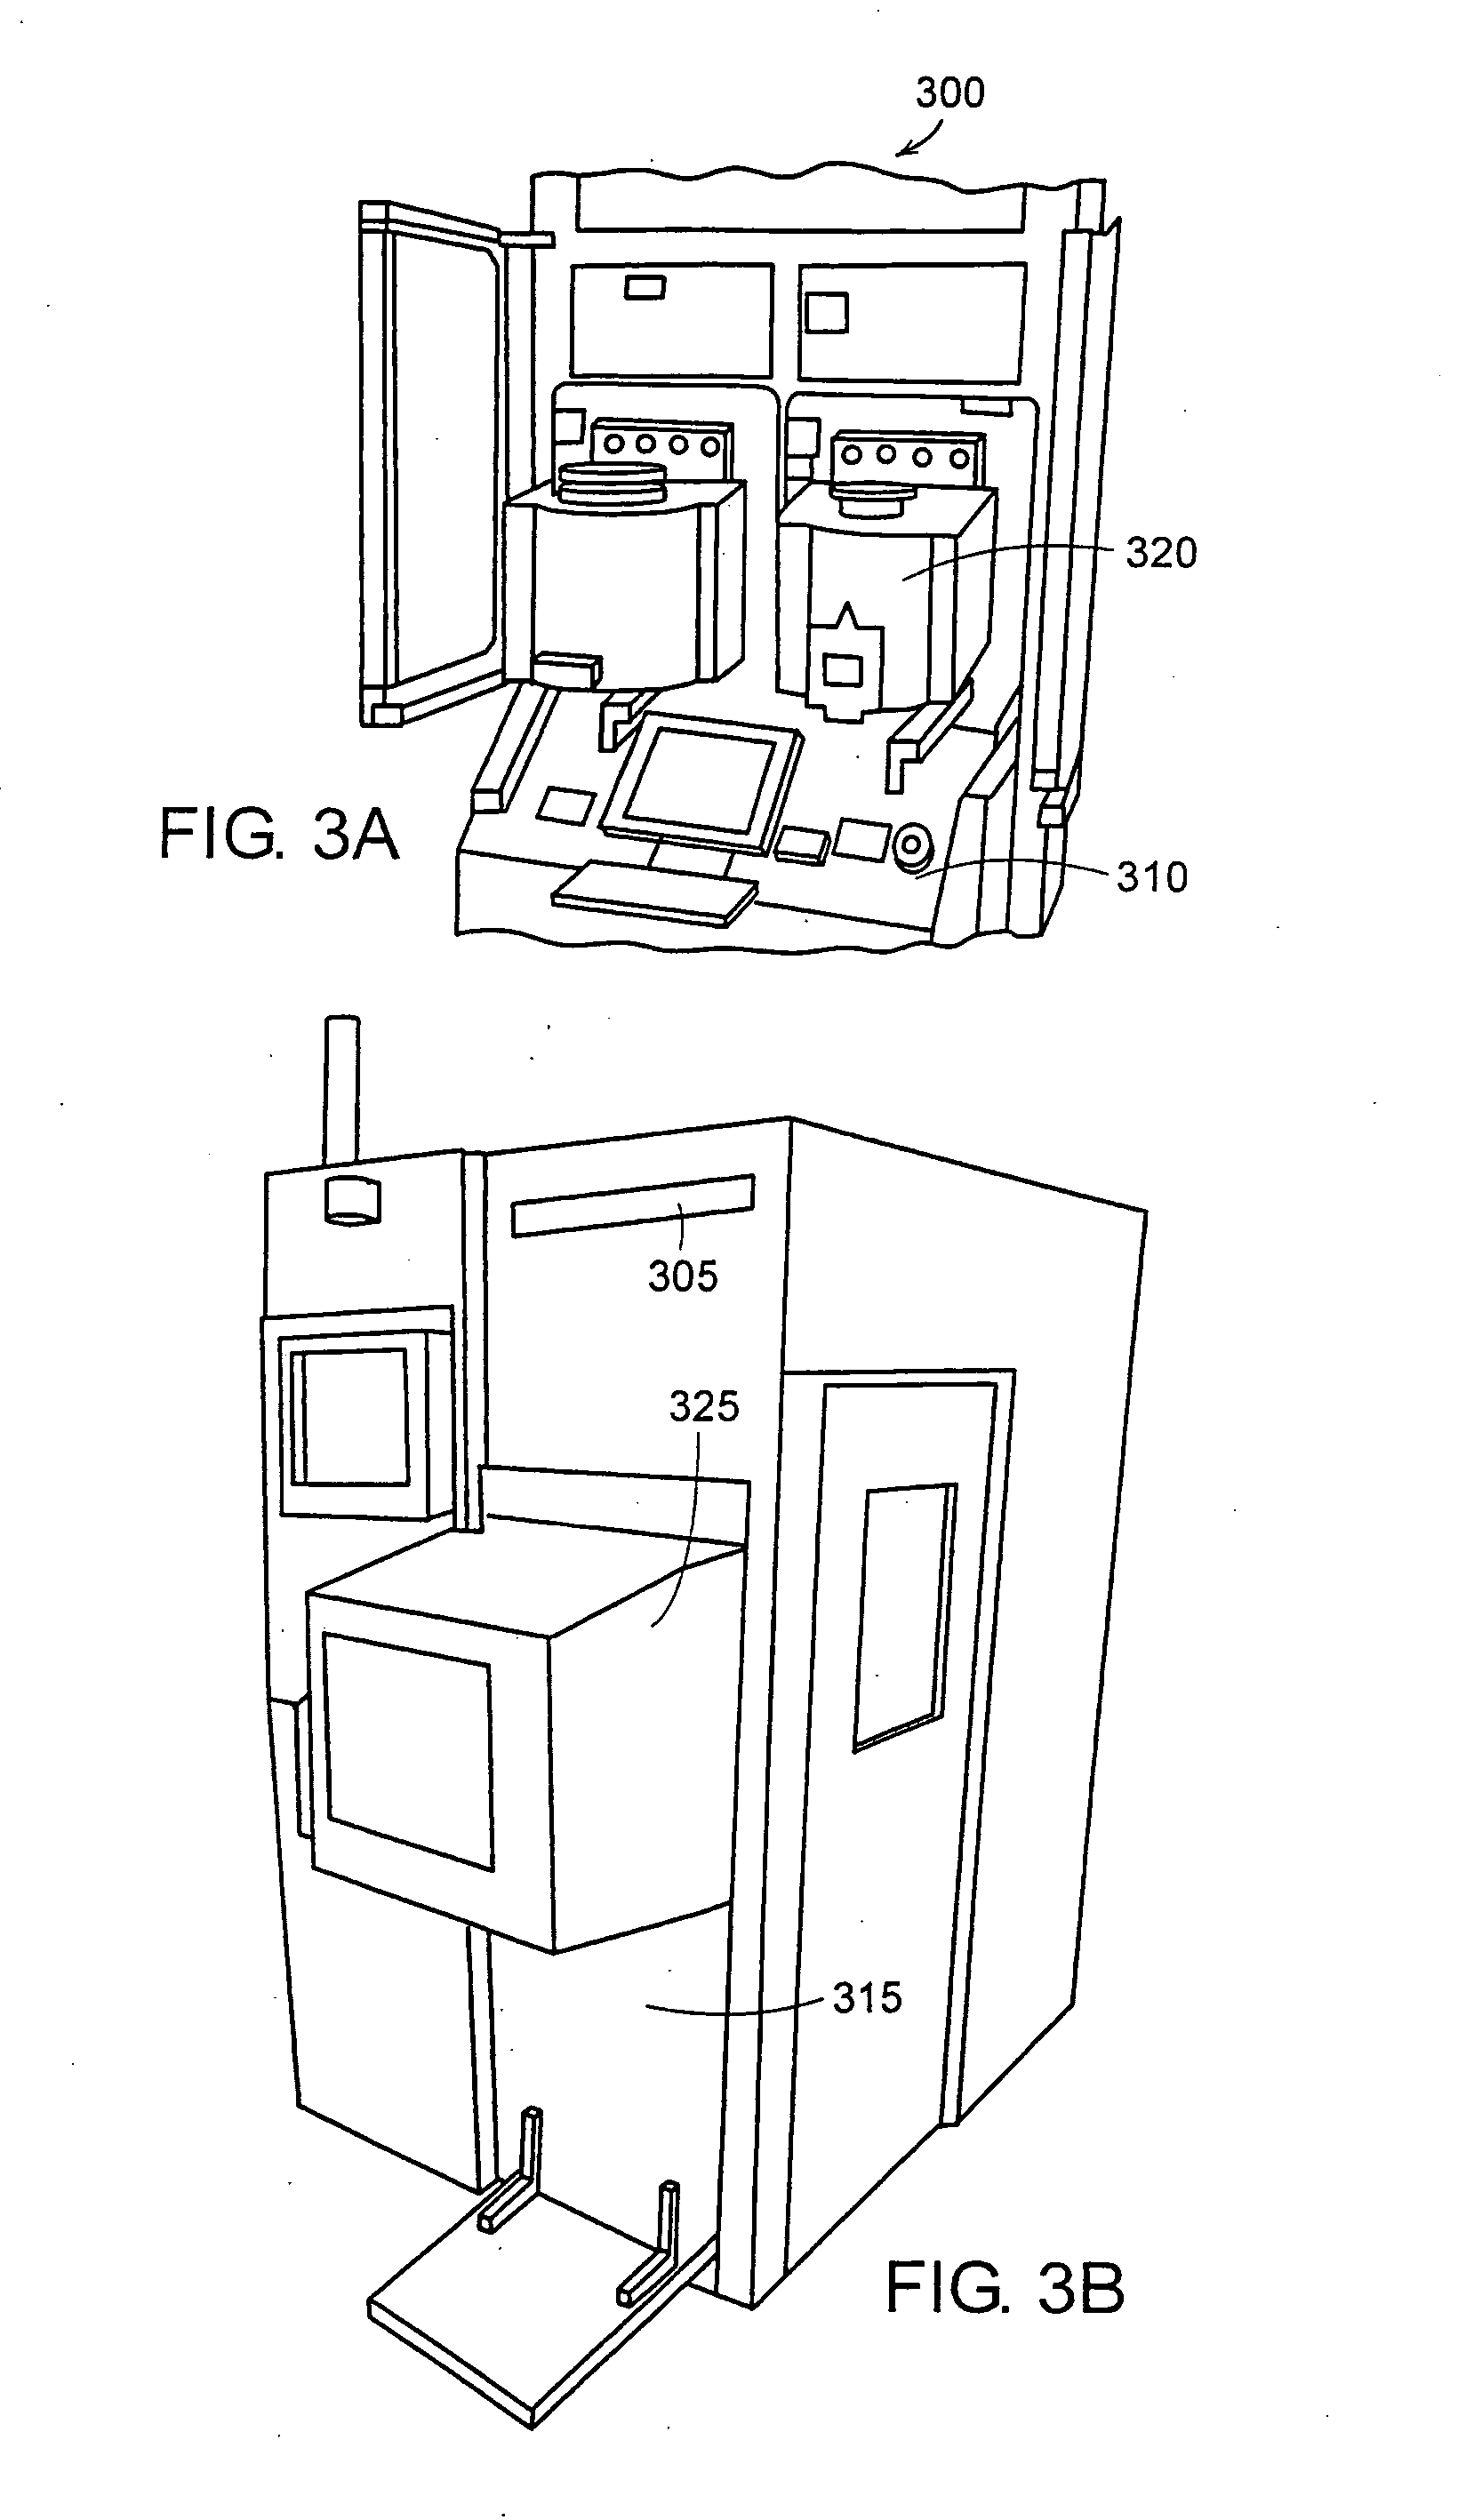 Purging of a wafer conveyance container